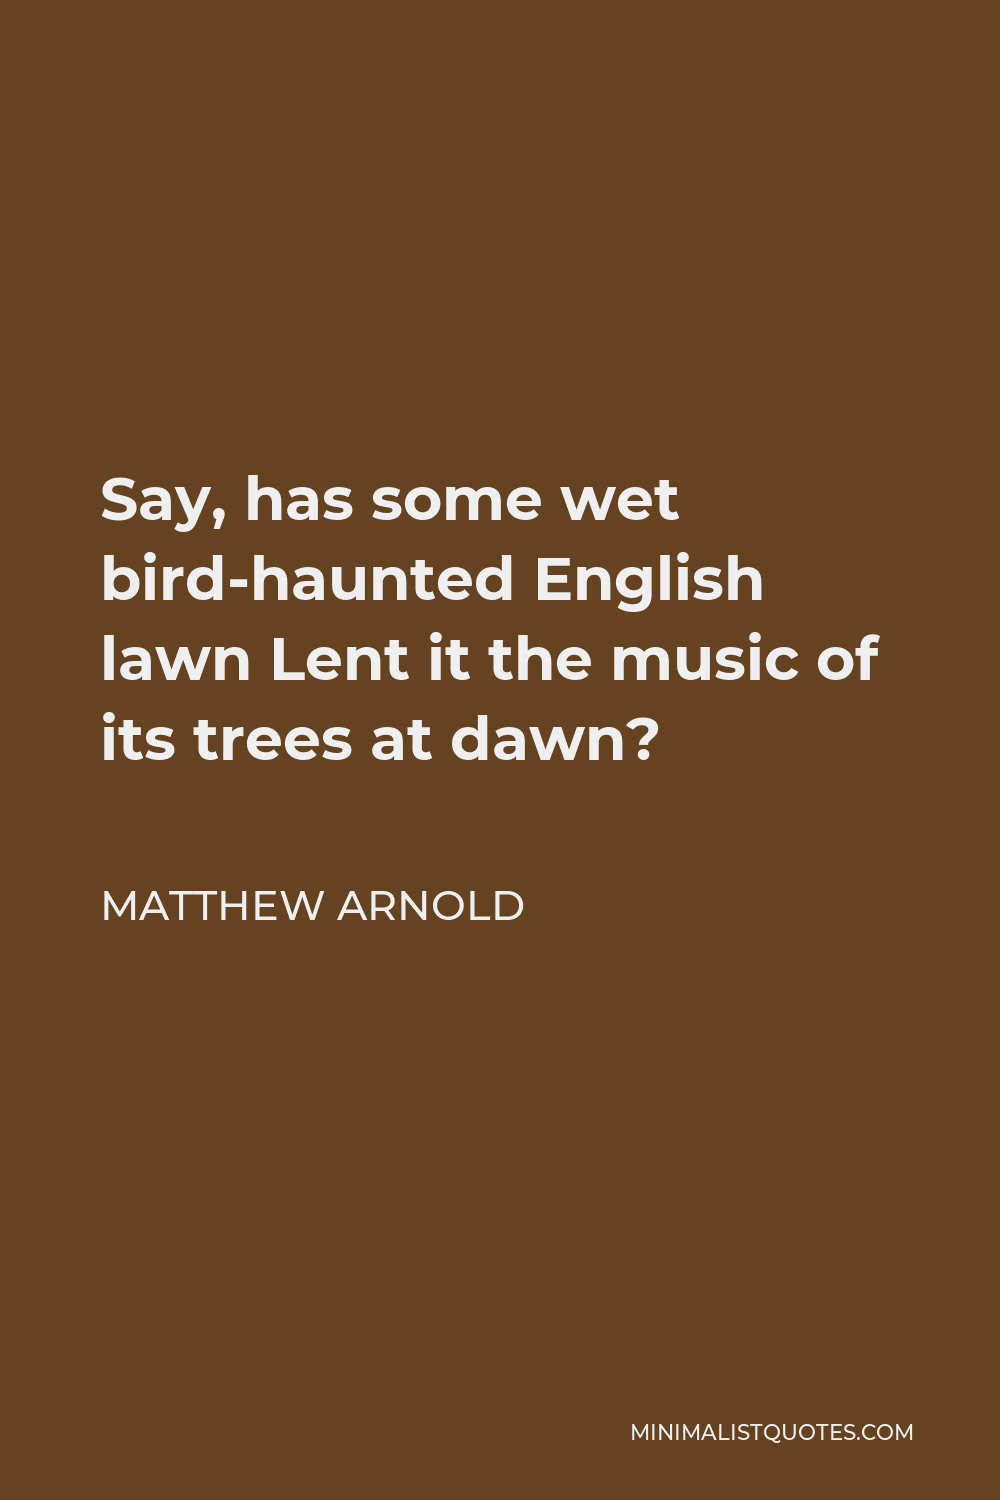 Matthew Arnold Quote - Say, has some wet bird-haunted English lawn Lent it the music of its trees at dawn?